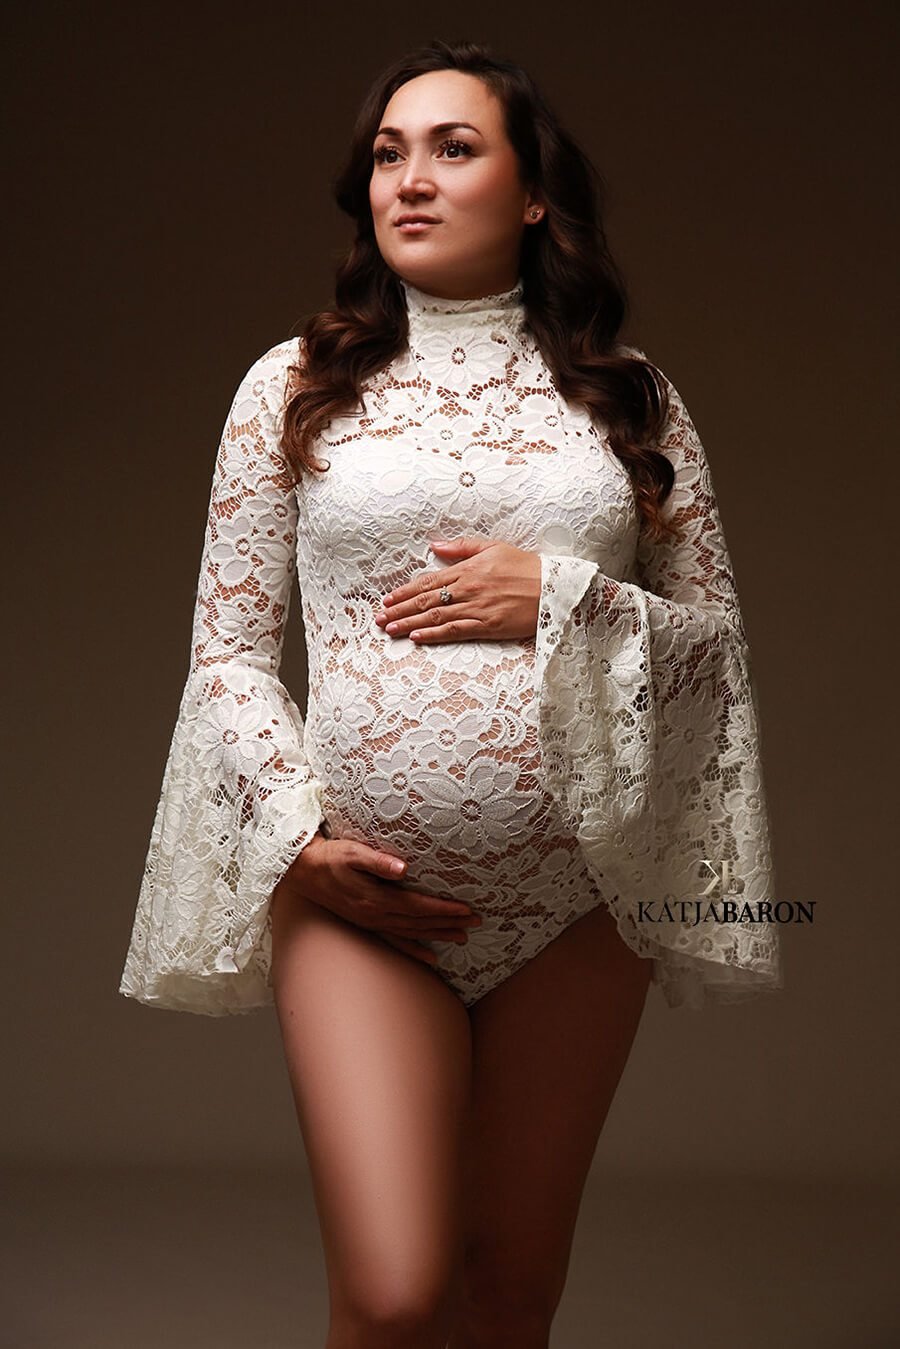 A pregnant woman is standing in the studio wearing a white bodysuit.  The bodysuit is made from lace